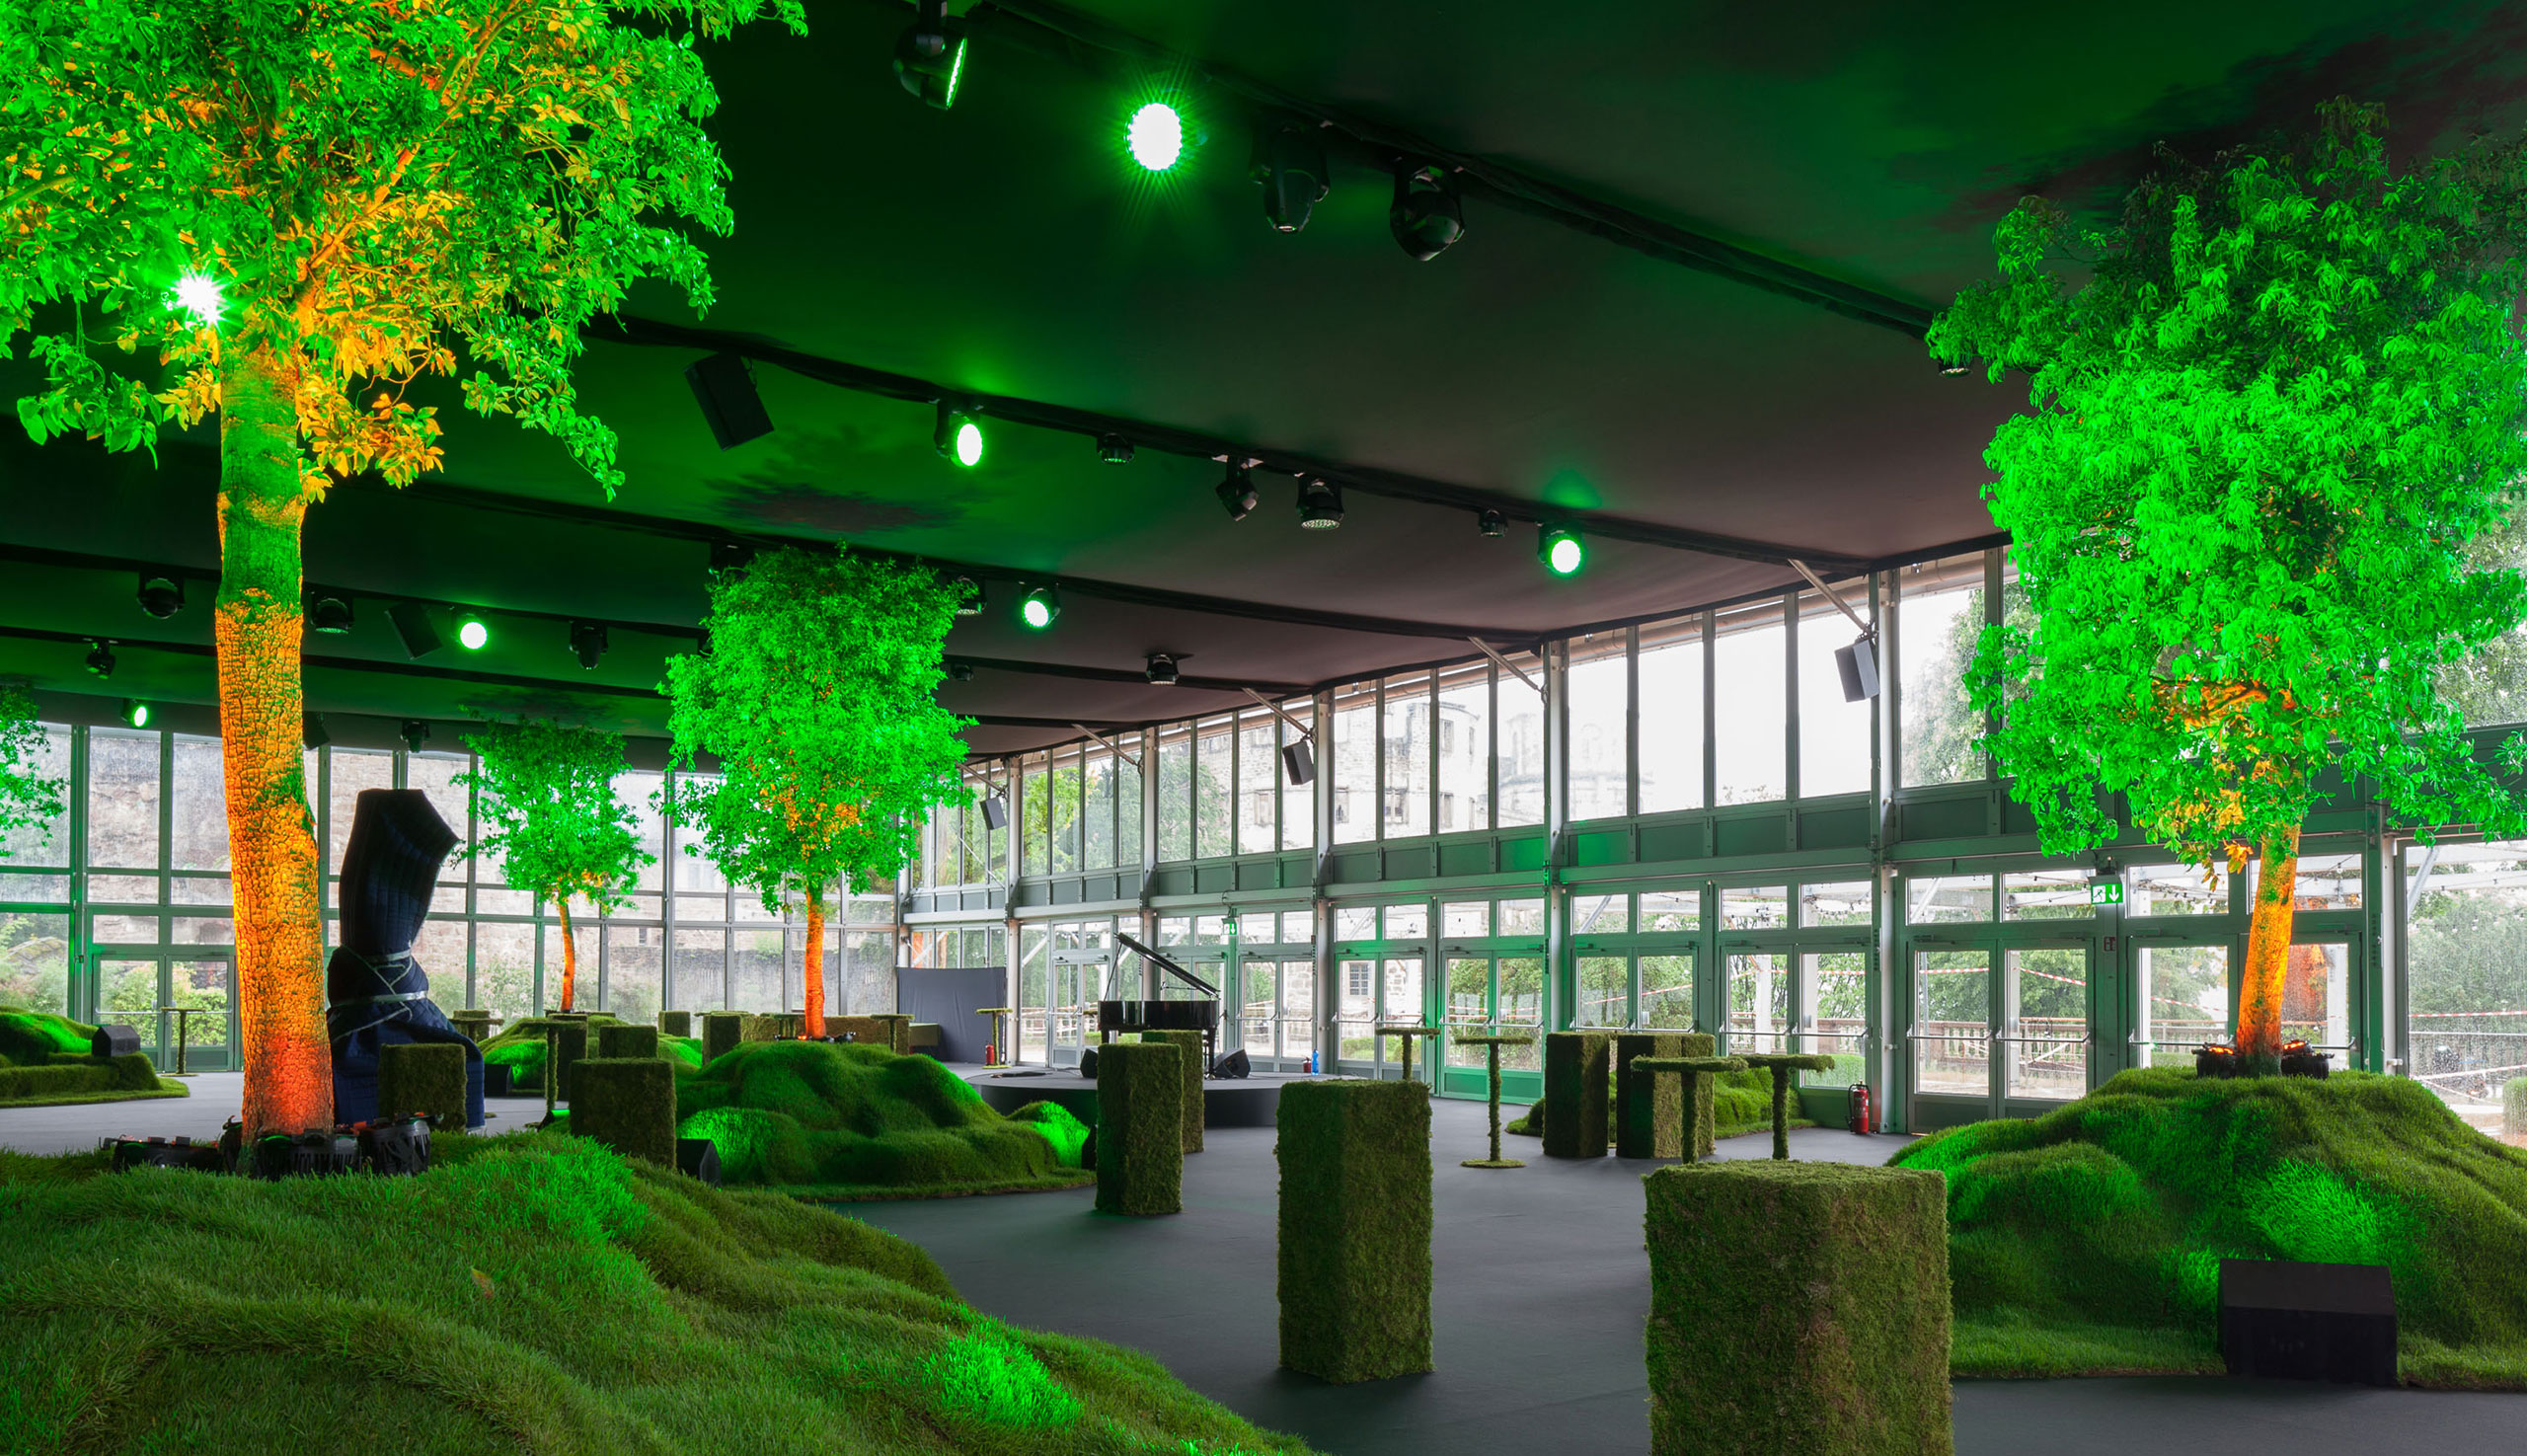 Interior view showroom with green illuminated trees